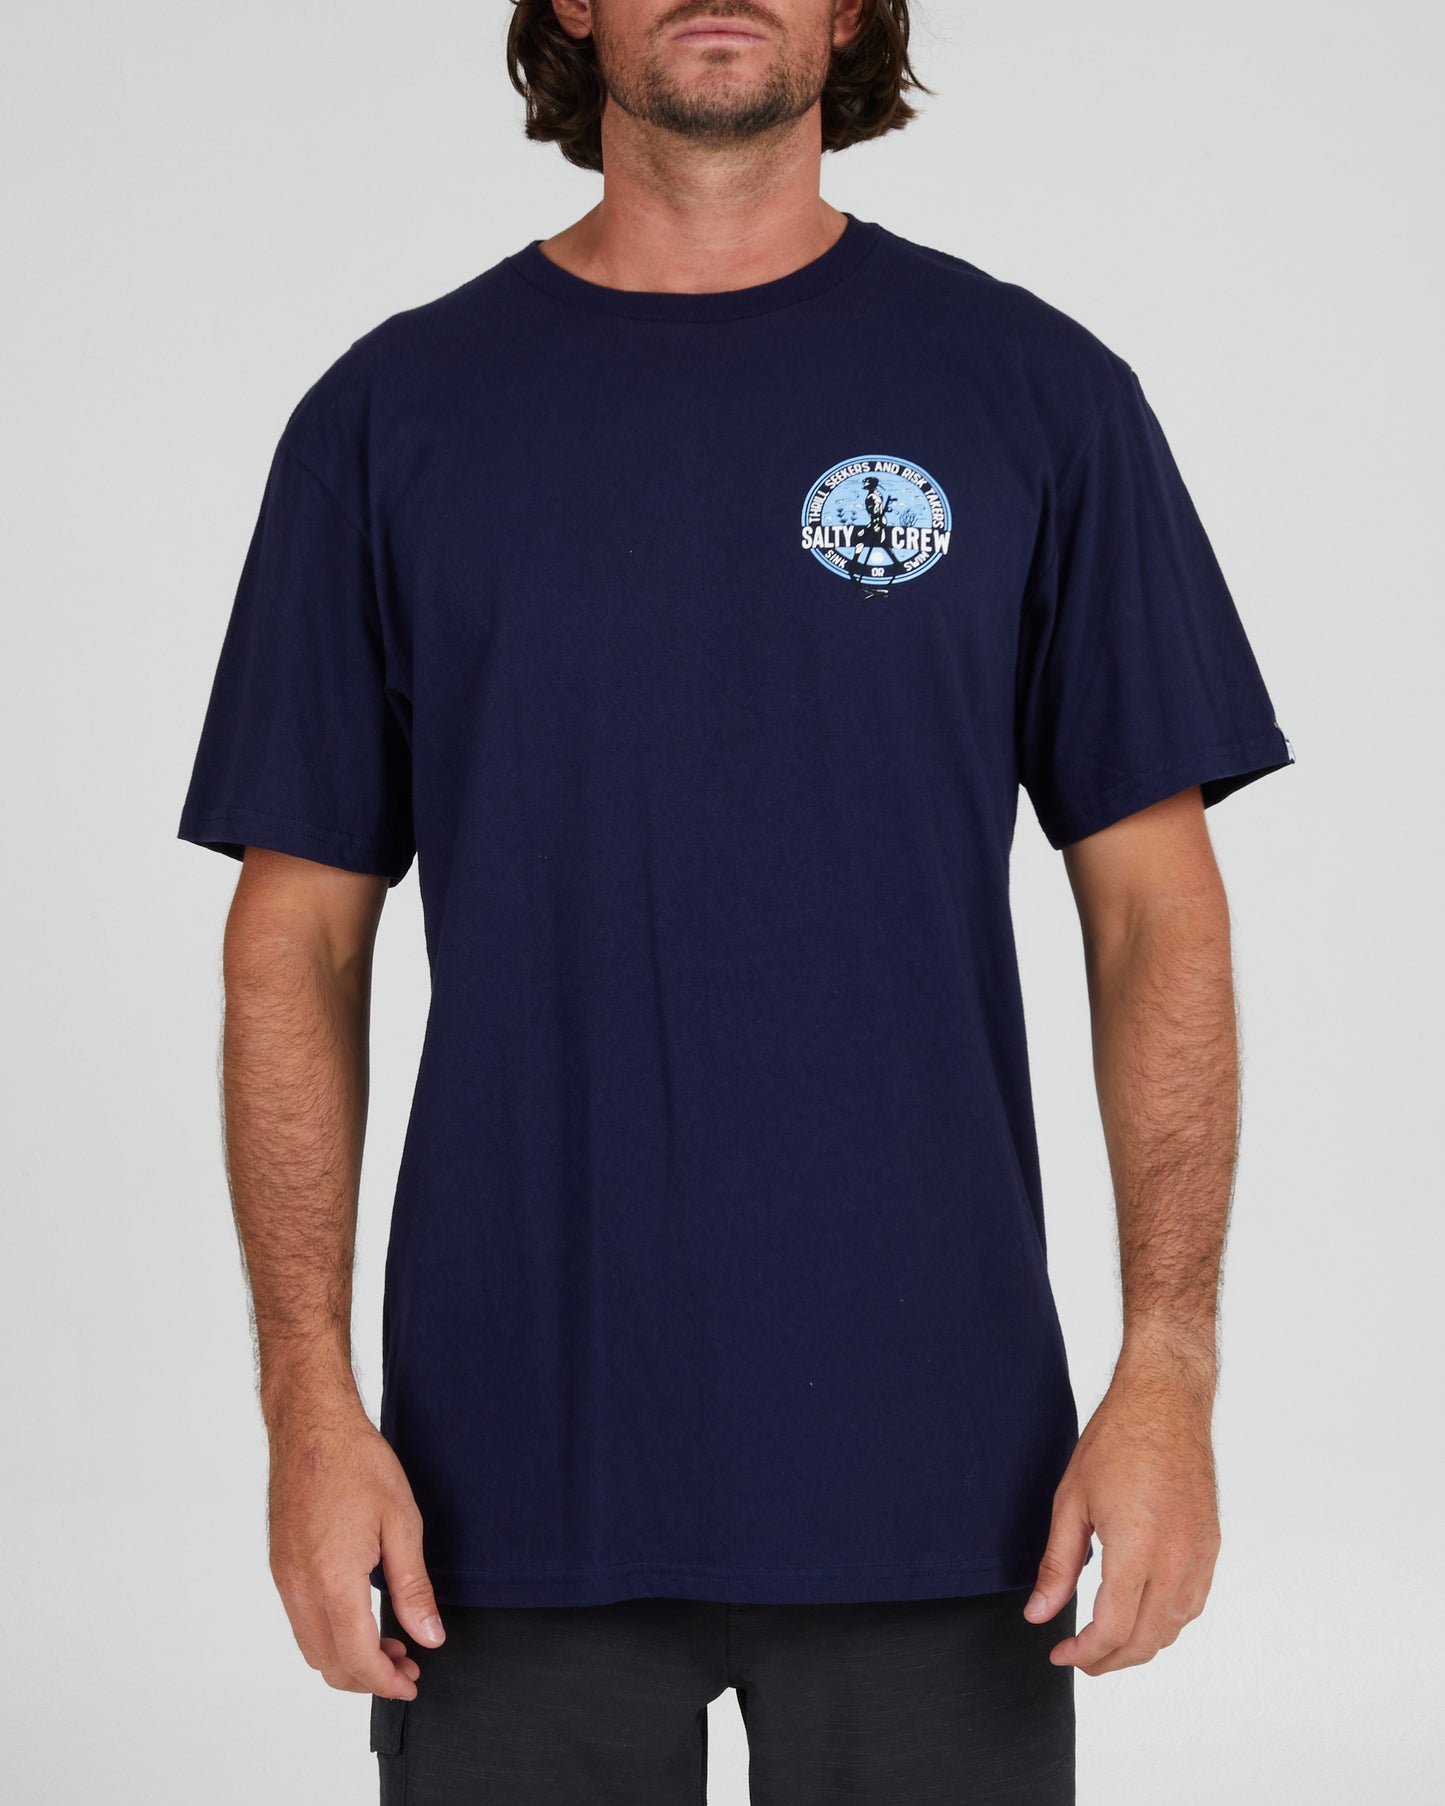 On body front of the Dive Bar Navy S/S Standard Tee